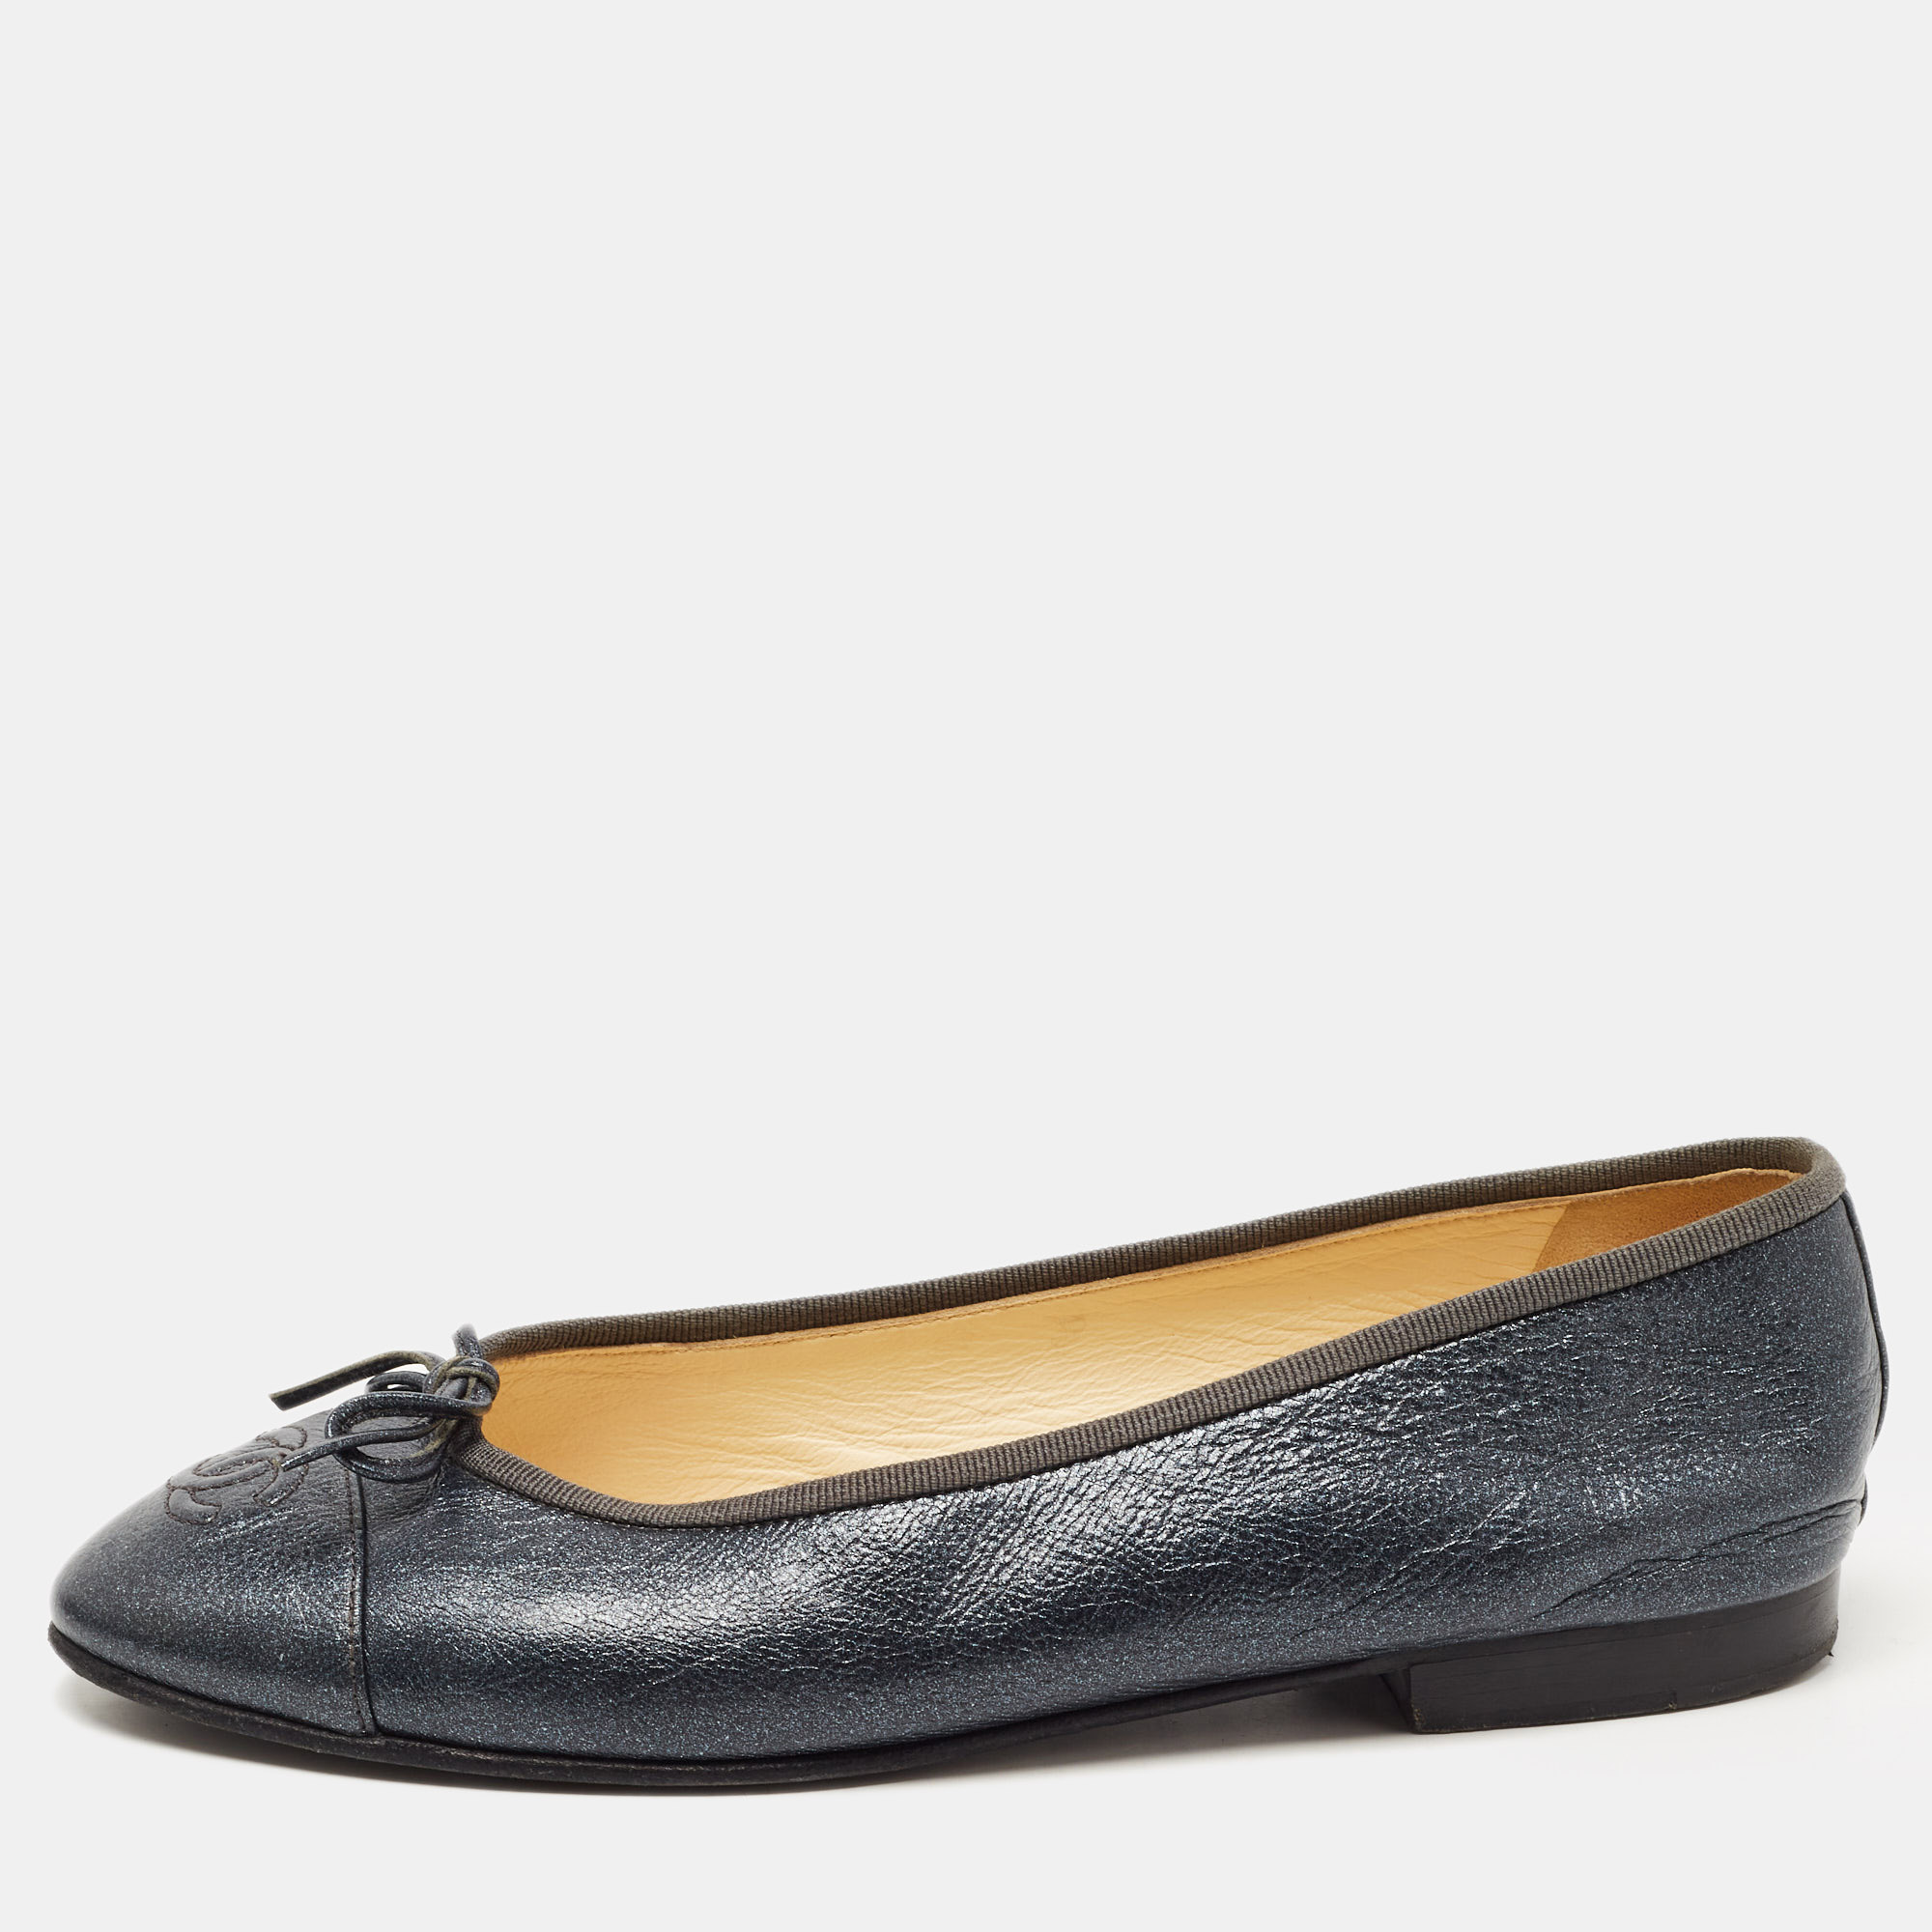 Pre-owned Chanel Metallic Leather Cc Cap Toe Ballet Flats Size